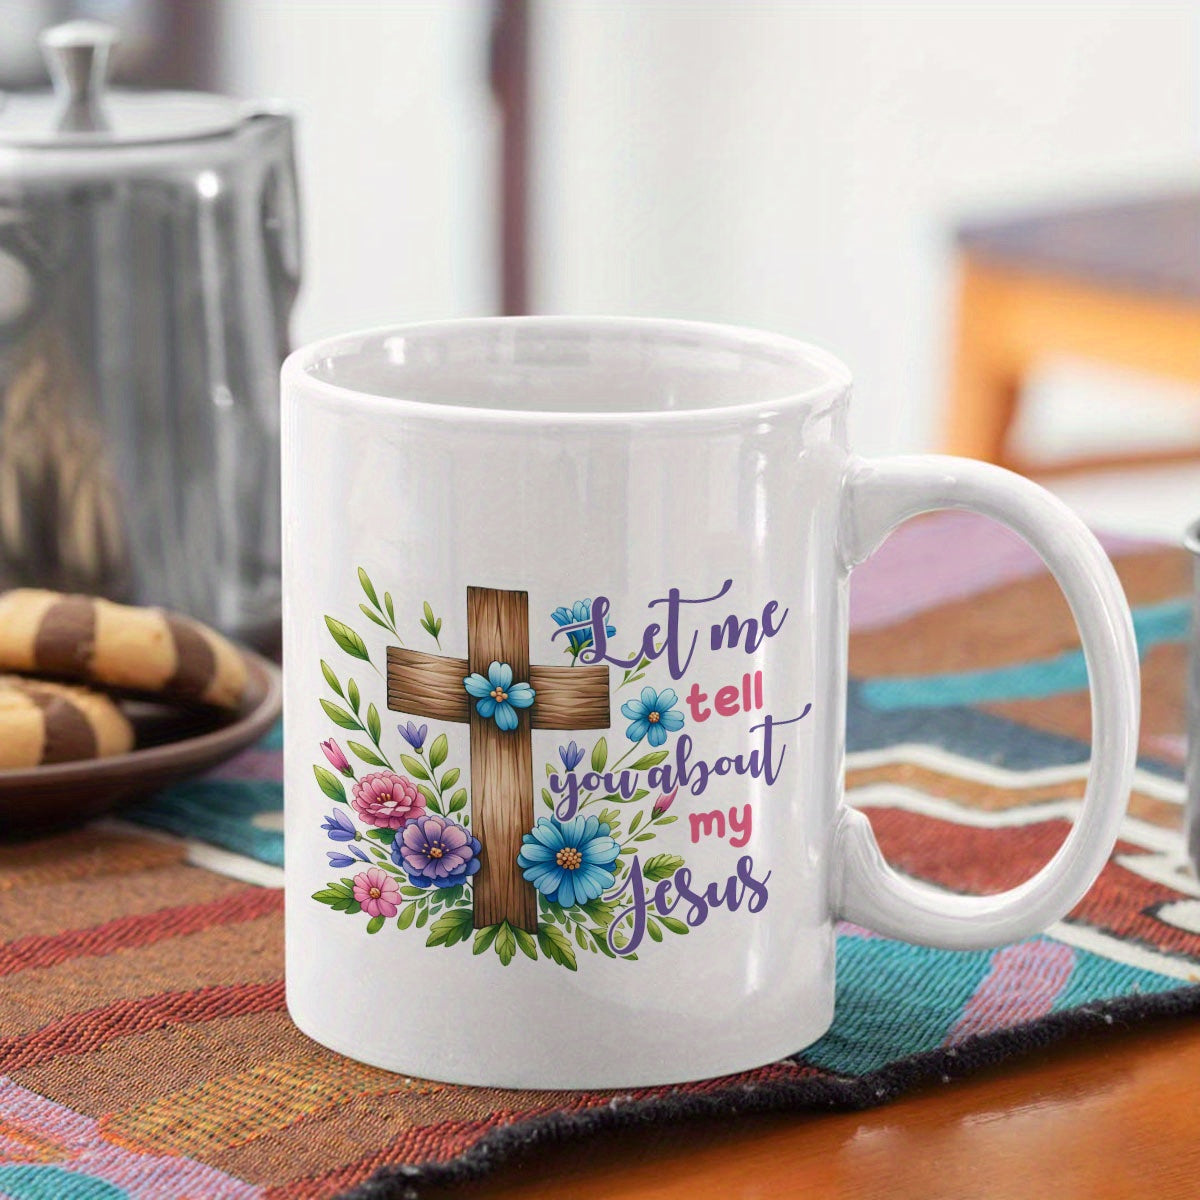 Let Me Tell You About My Jesus Christian White Ceramic Mug 11oz Double Side Printed claimedbygoddesigns